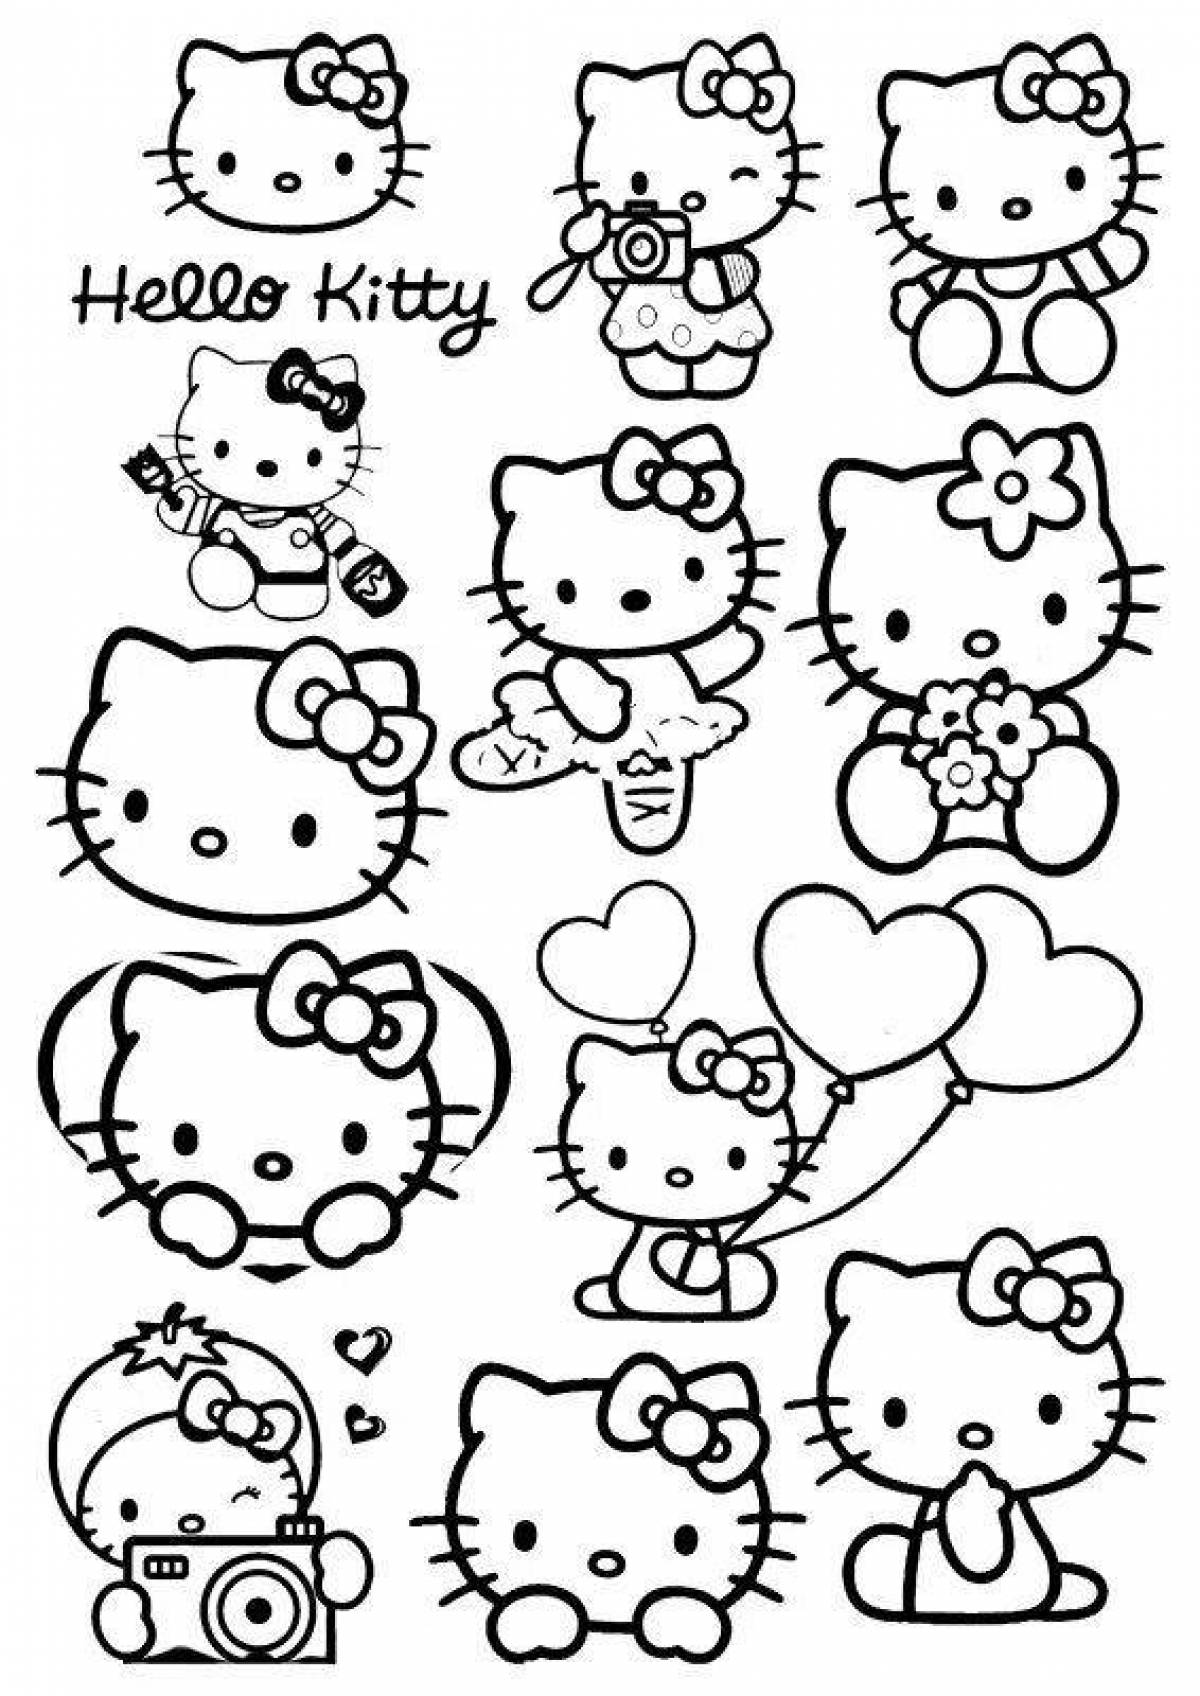 Fun coloring page of hello kitty stickers